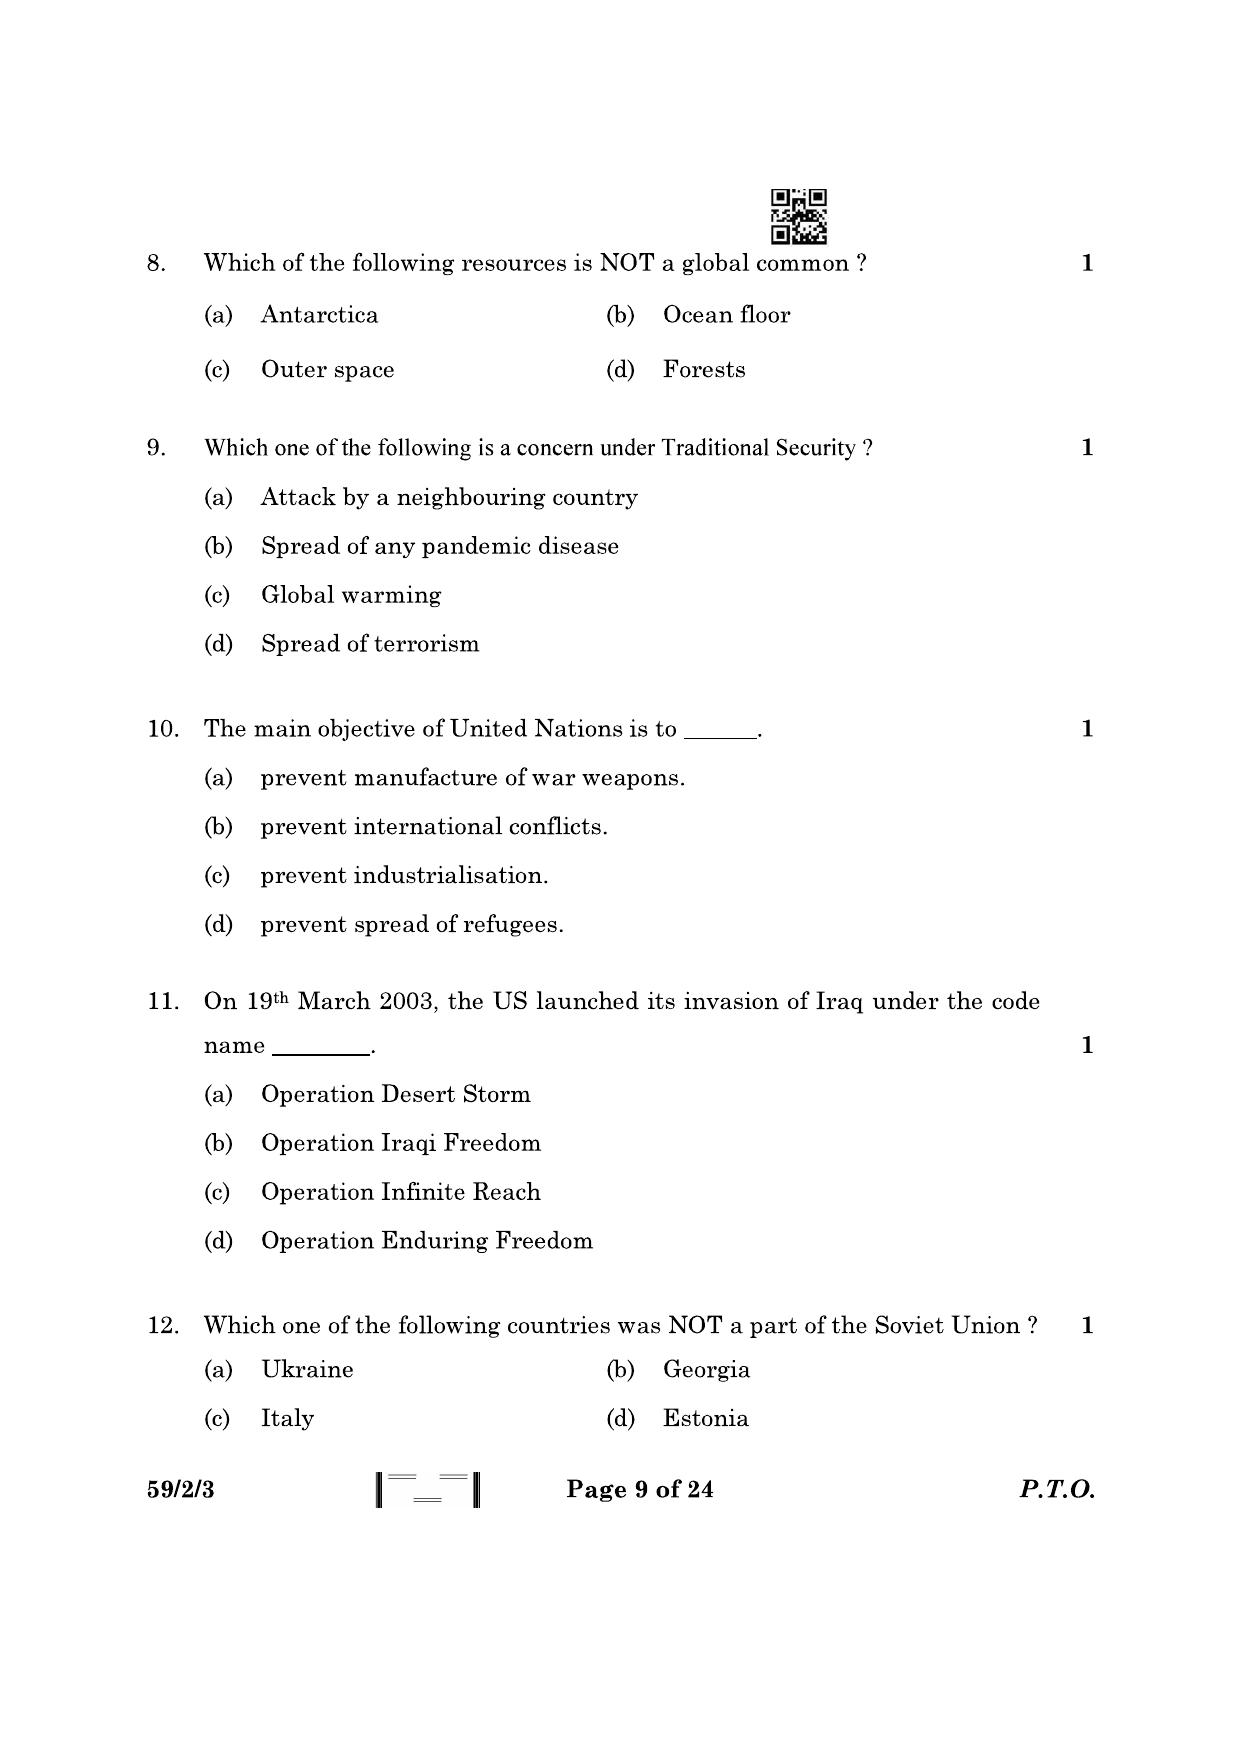 CBSE Class 12 59-2-3 Political Science 2023 Question Paper - Page 9